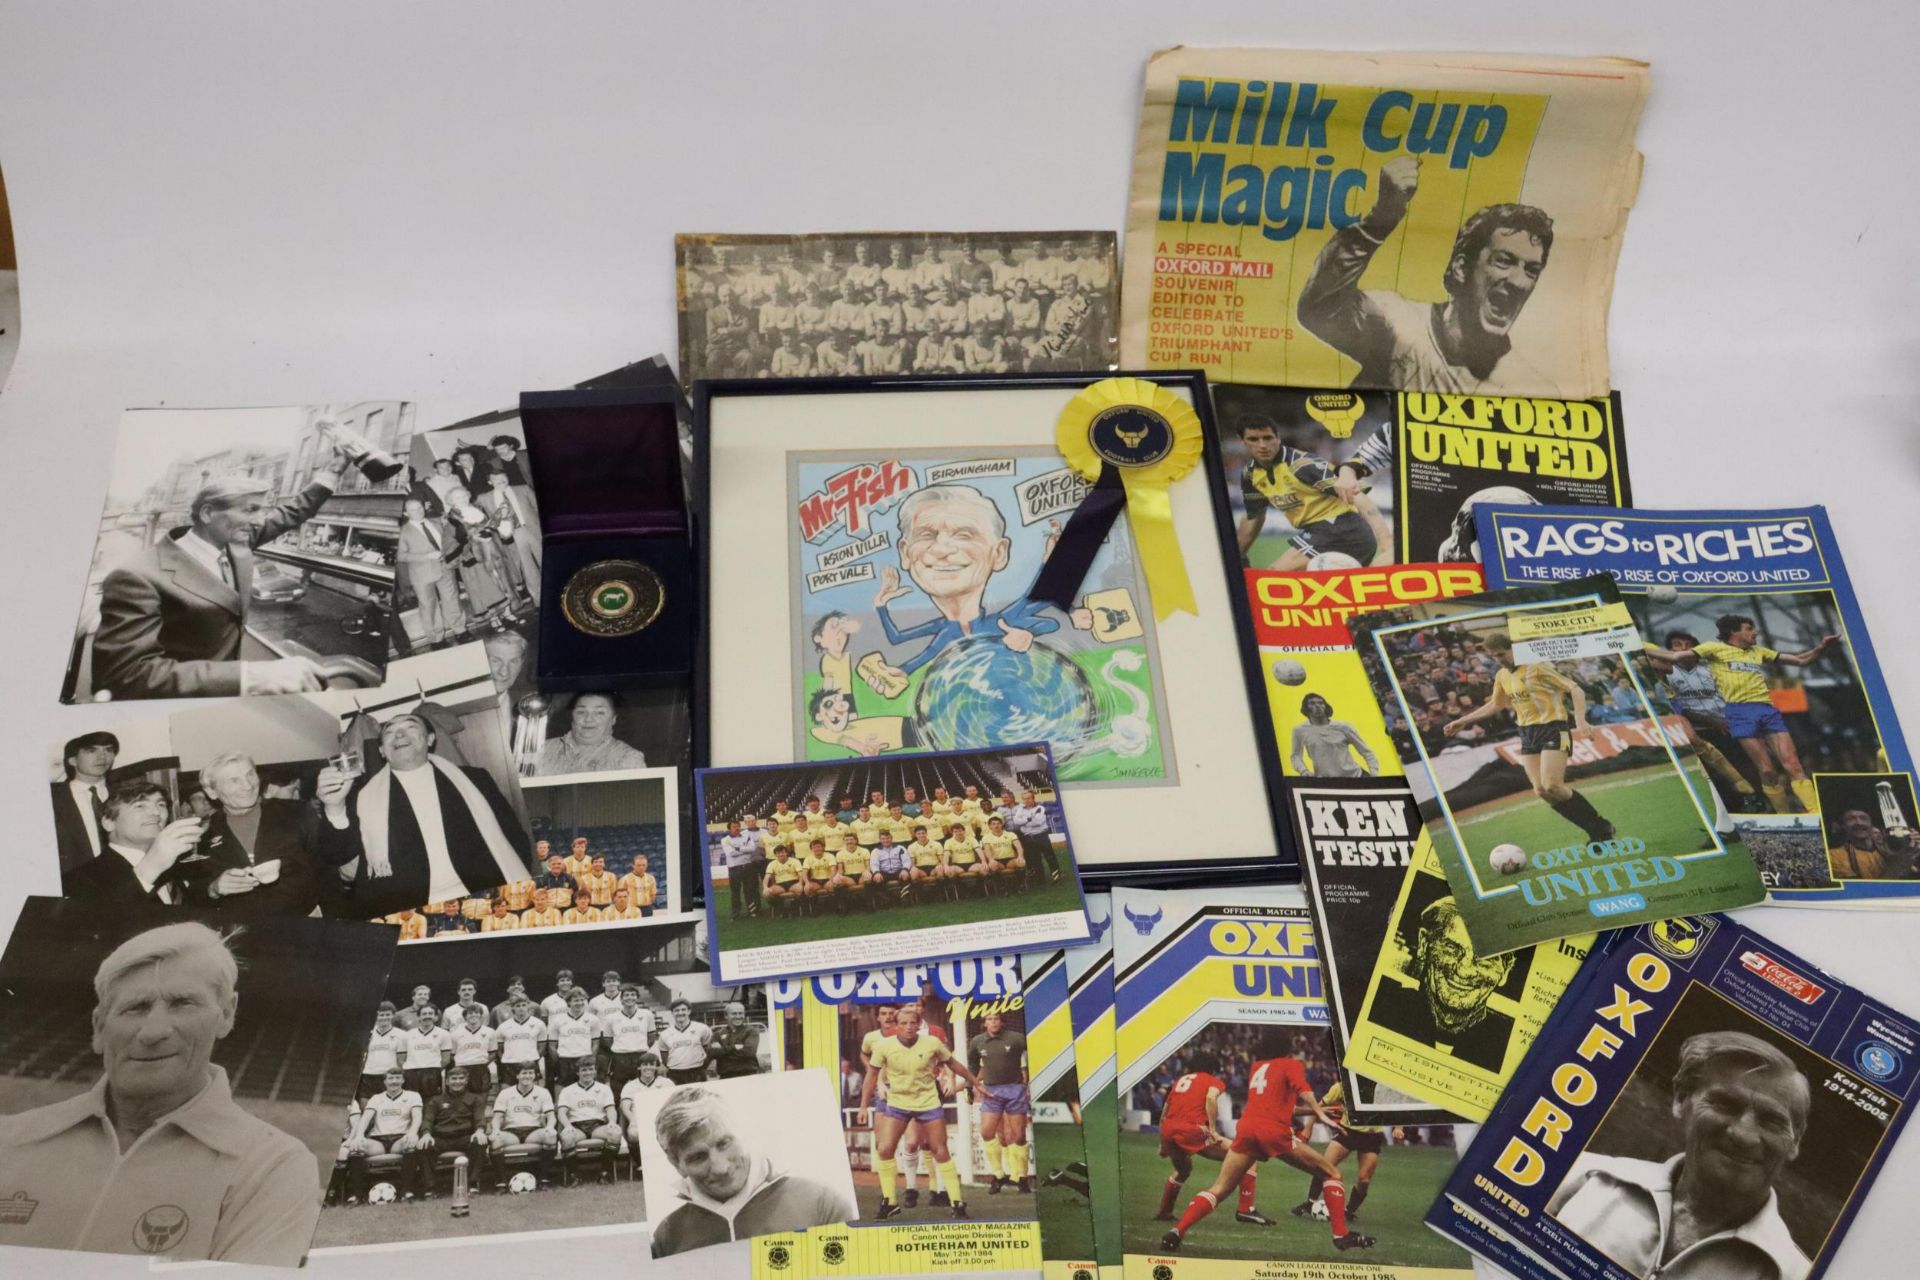 A LARGE QUANTITY OF MEMORABILIA AND EPHEMERA RELATING TO OXFORD UNITED AND KEN FISH, TO INCLUDE AN